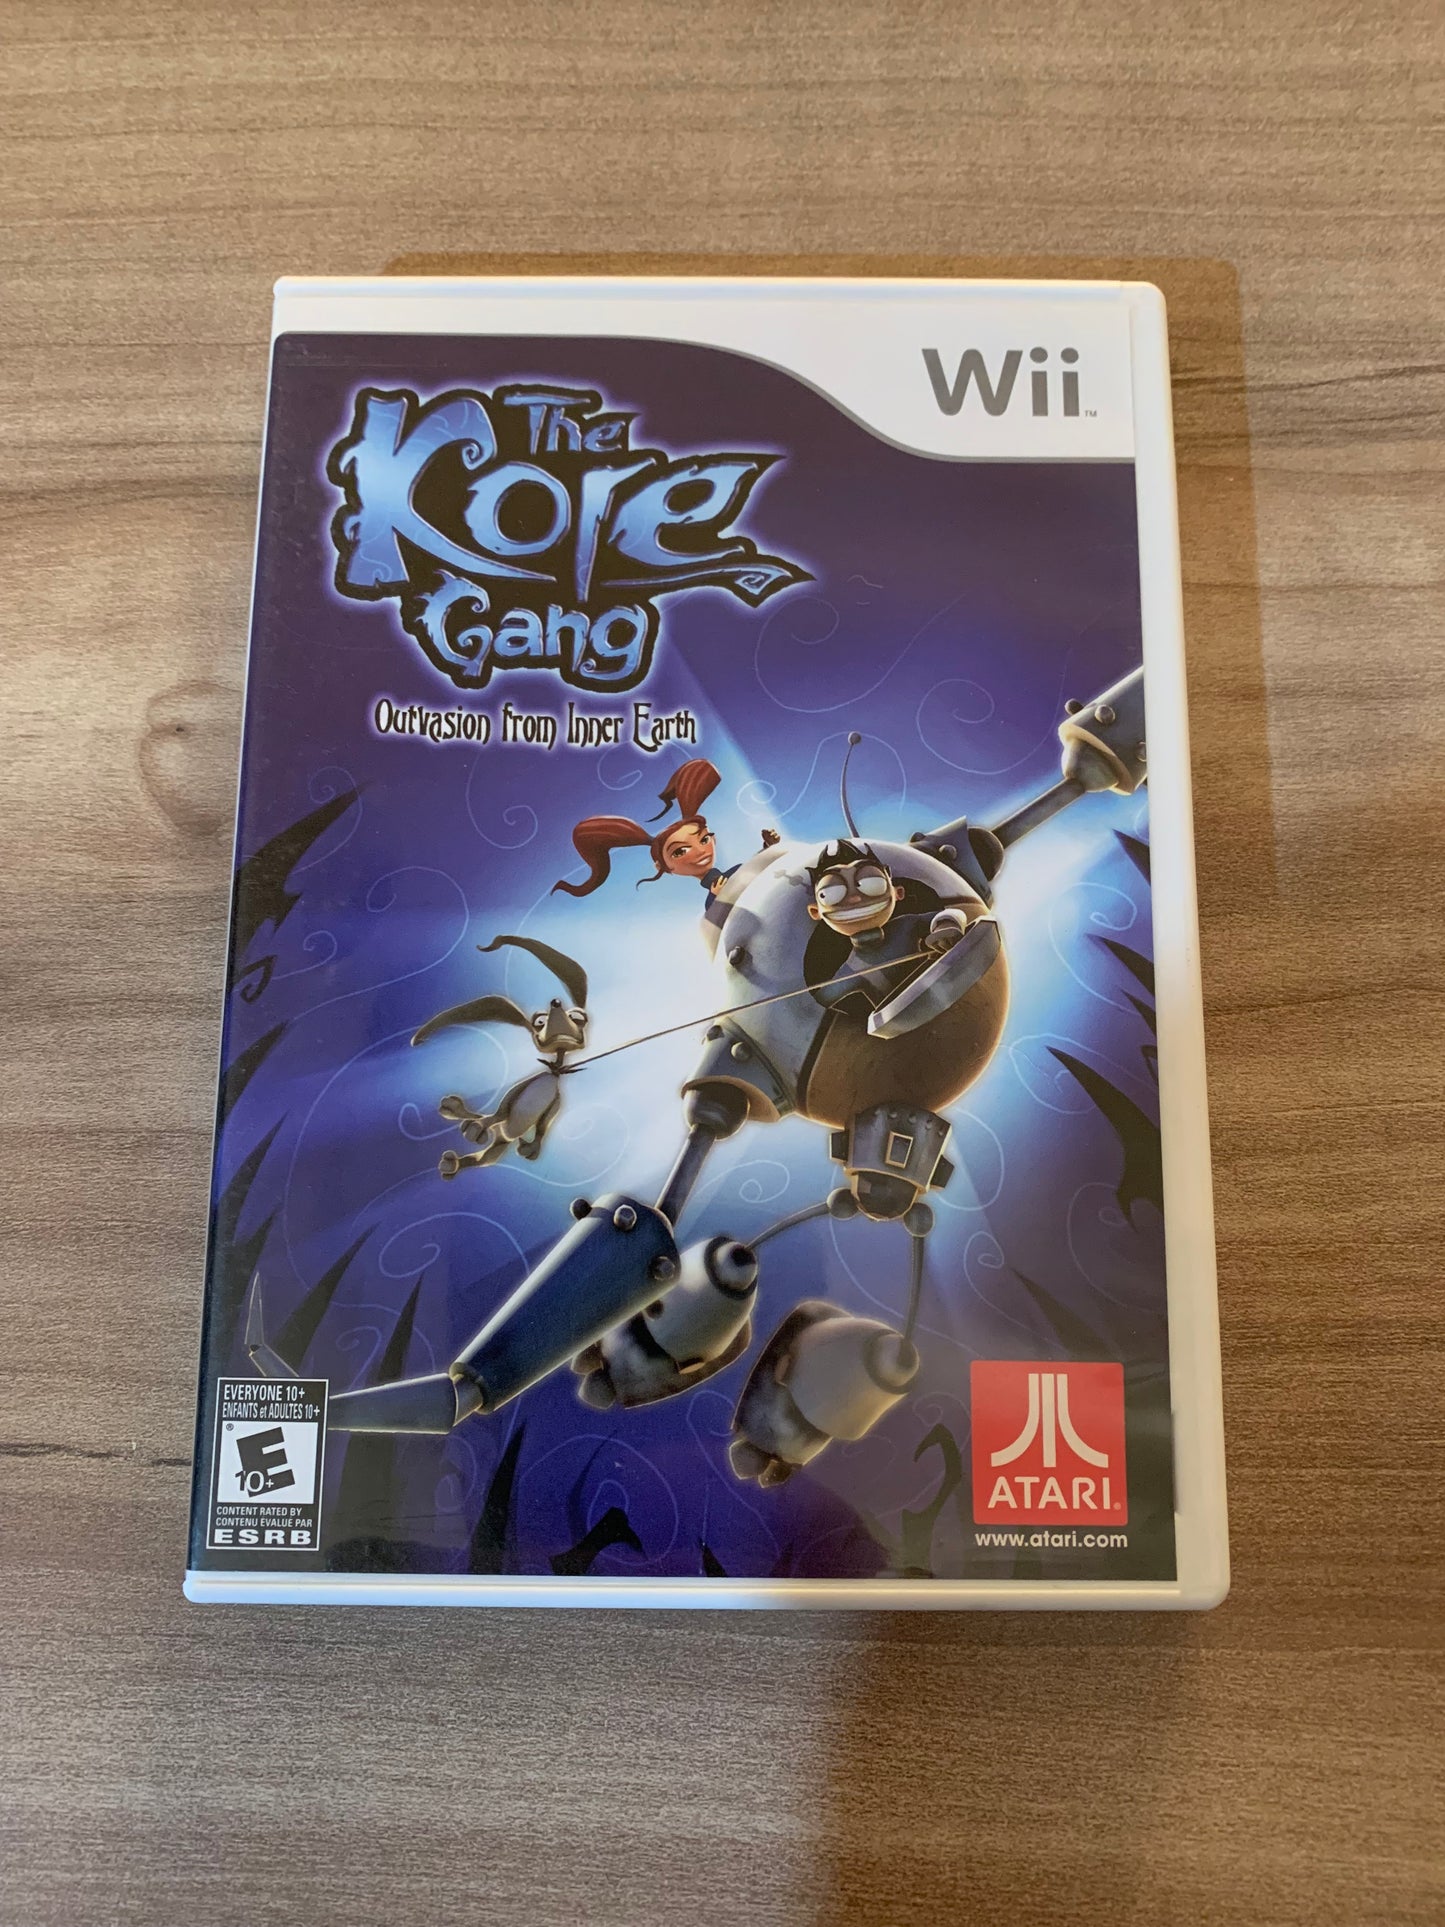 NiNTENDO Wii | THE KORE GANG OUTVASiON FROM iNNER EARTH